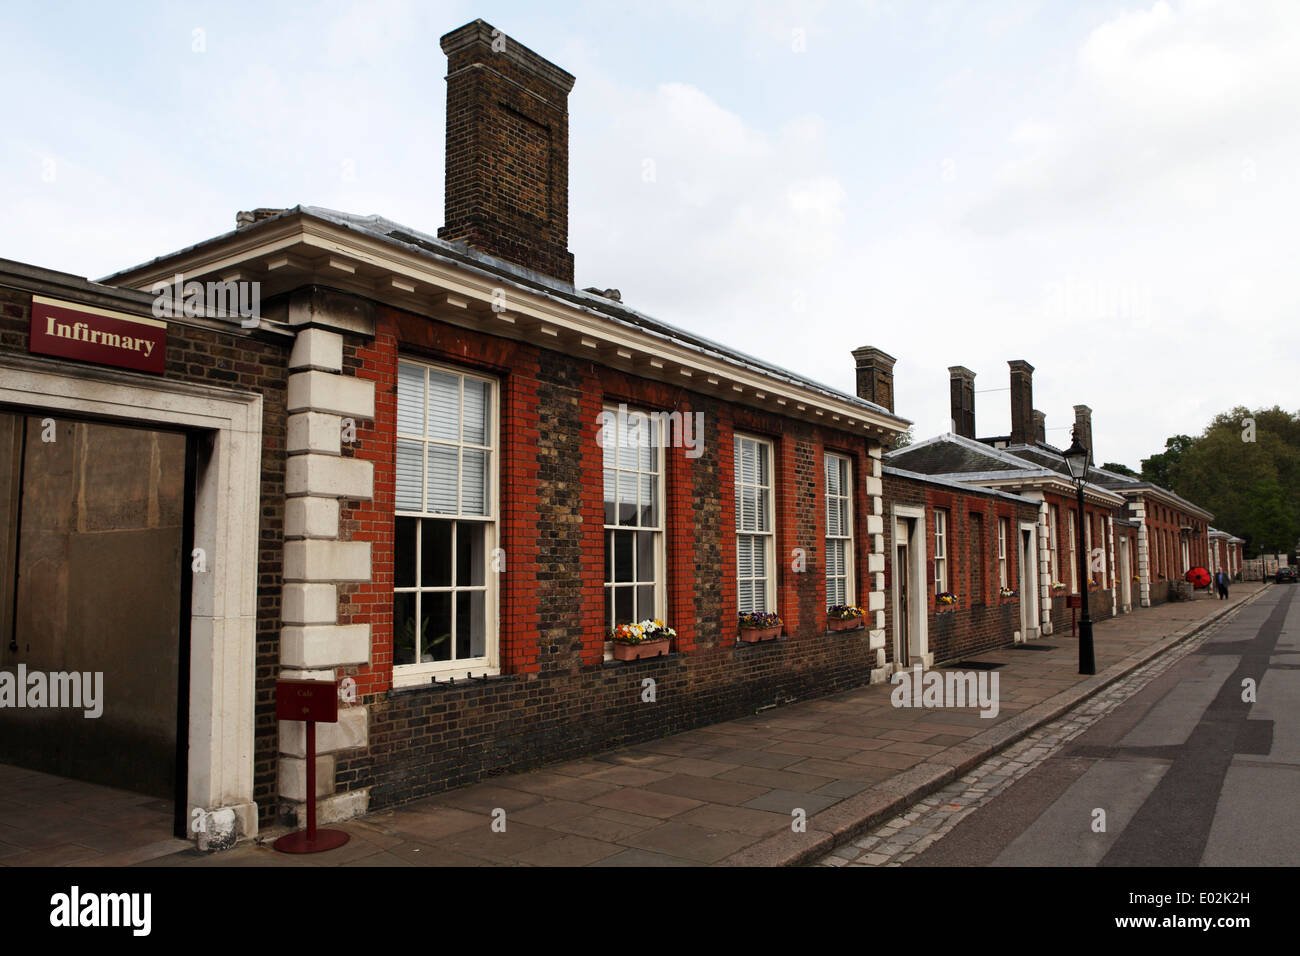 The entrance to the infirmary at the Royal Hospital Chelsea in London, United Kingdom. Stock Photo